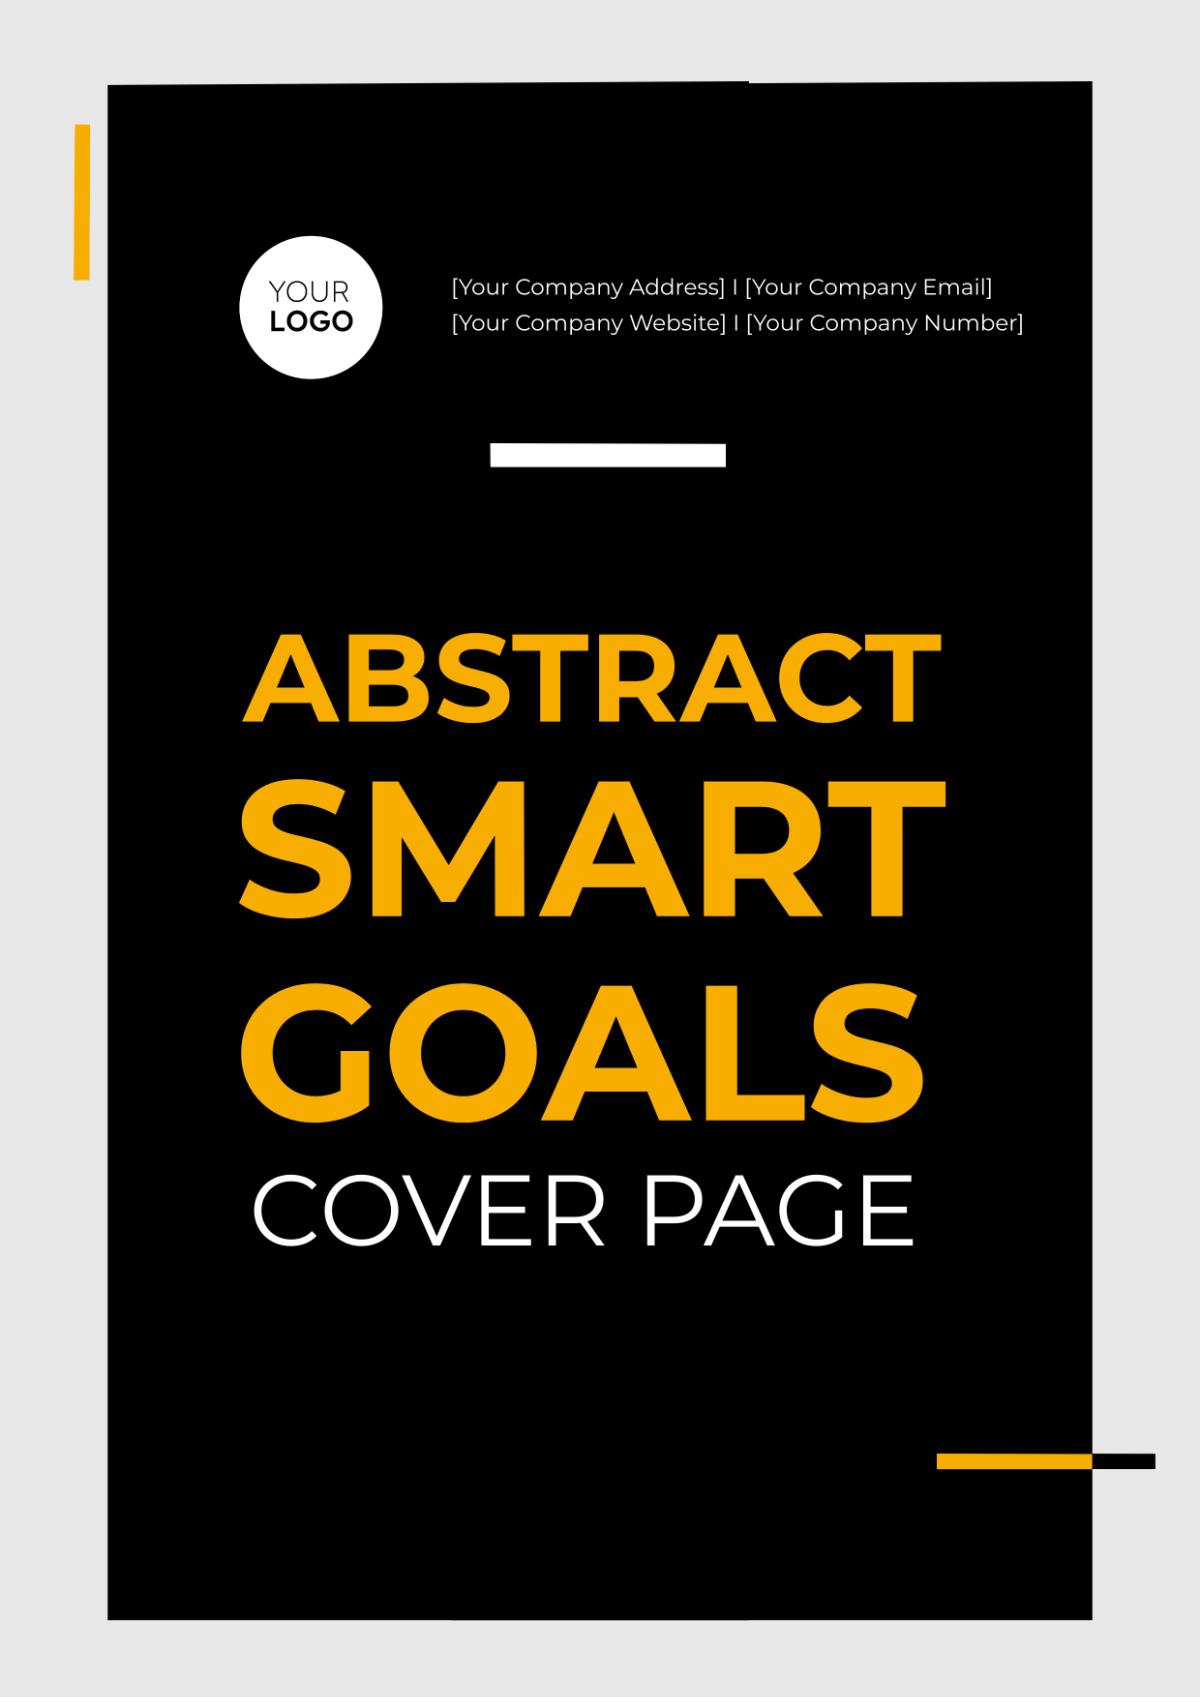 Abstract SMART Goals Cover Page